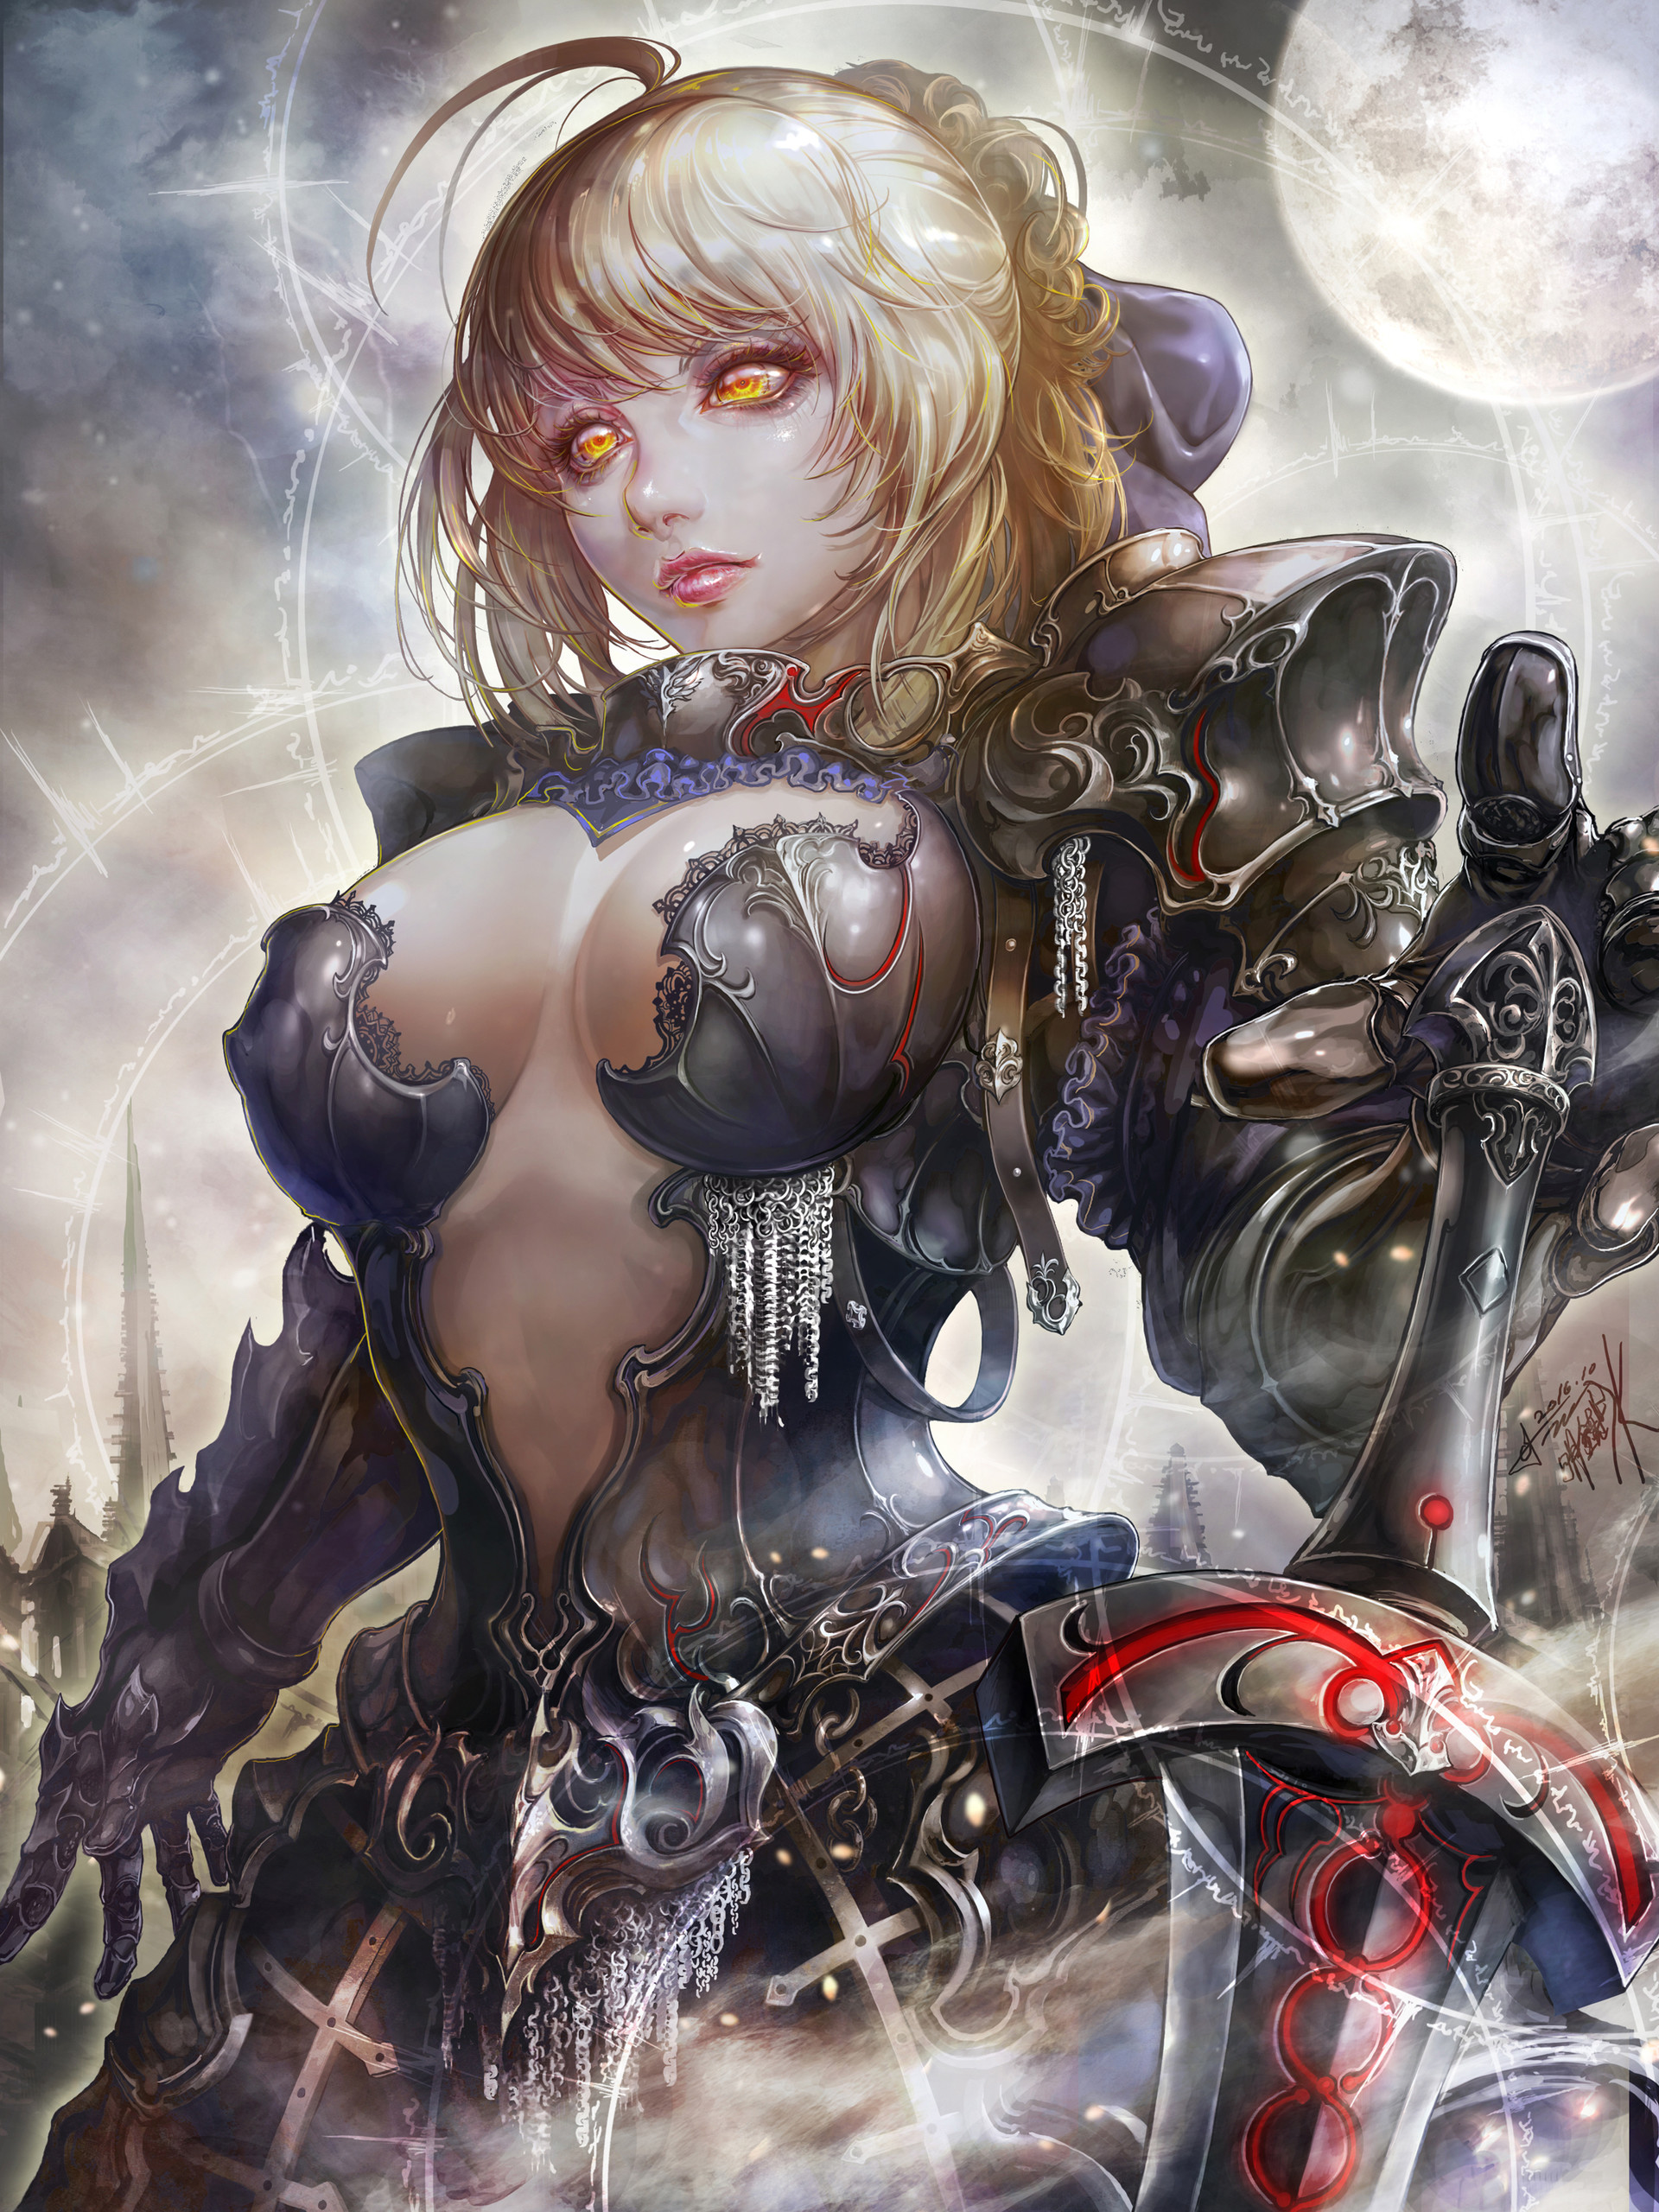 Anime 1920x2560 Saber Alter Fate/Stay Night Fate series anime girls